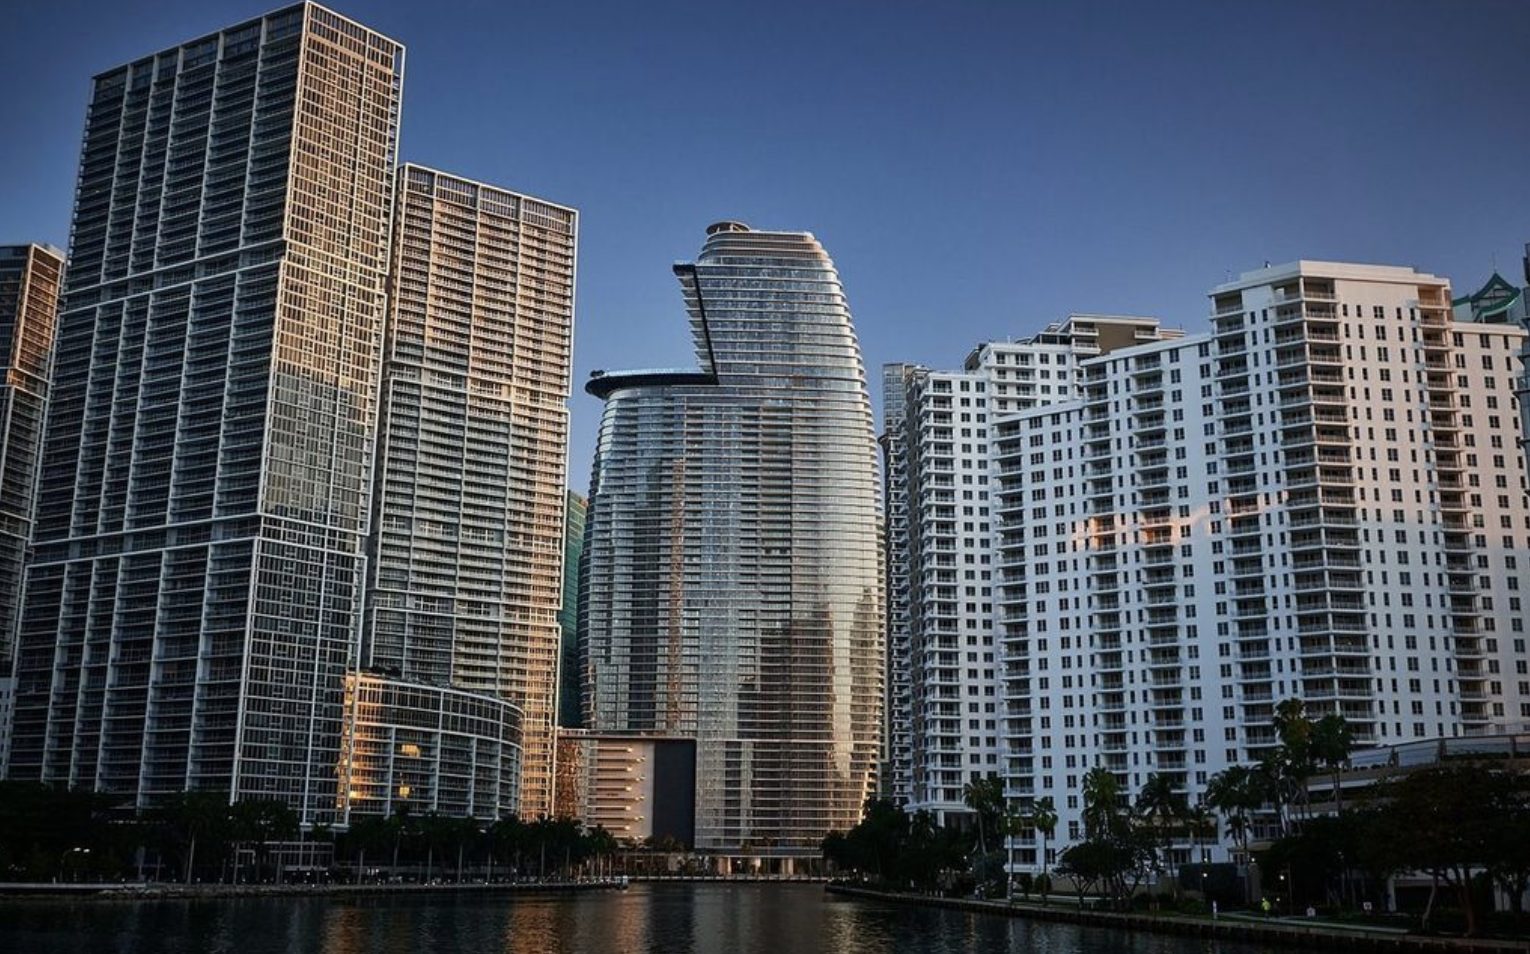 Aston Martin Residences Miami - the ultra-luxury brand’s first real estate project